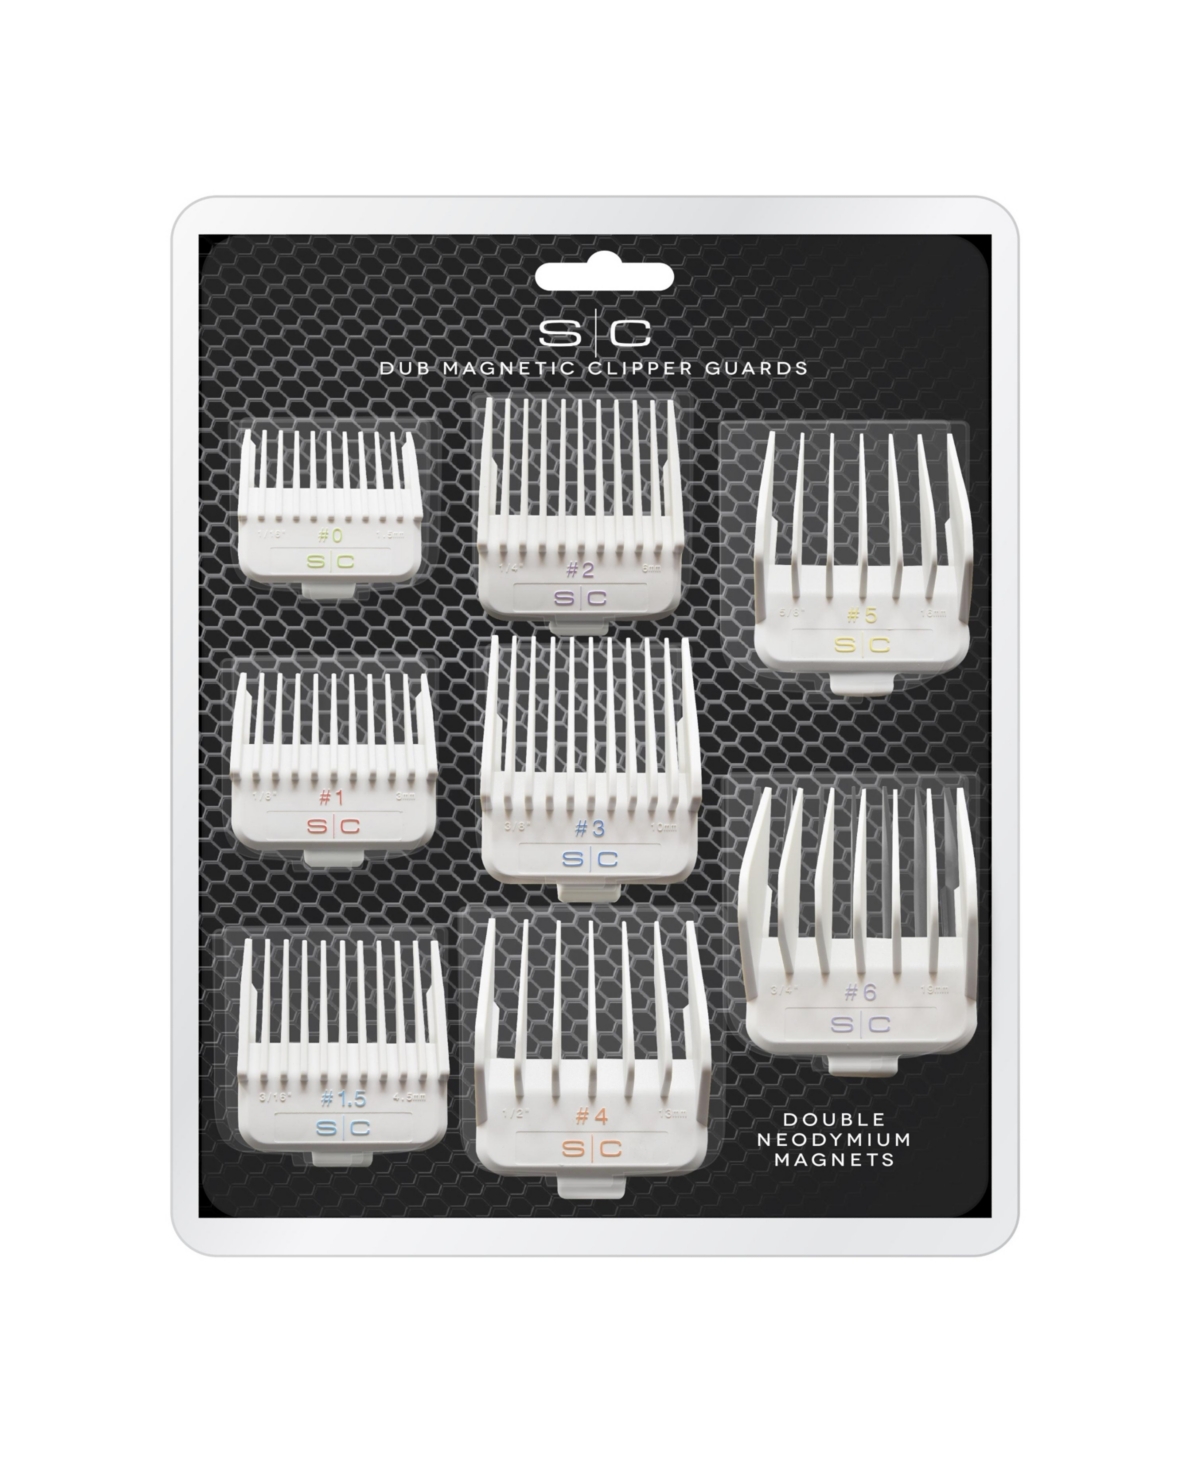 Barber Hairstylist Dub Universal Double Magnetic Clipper Guards, 8 Piece Assorted Sizes